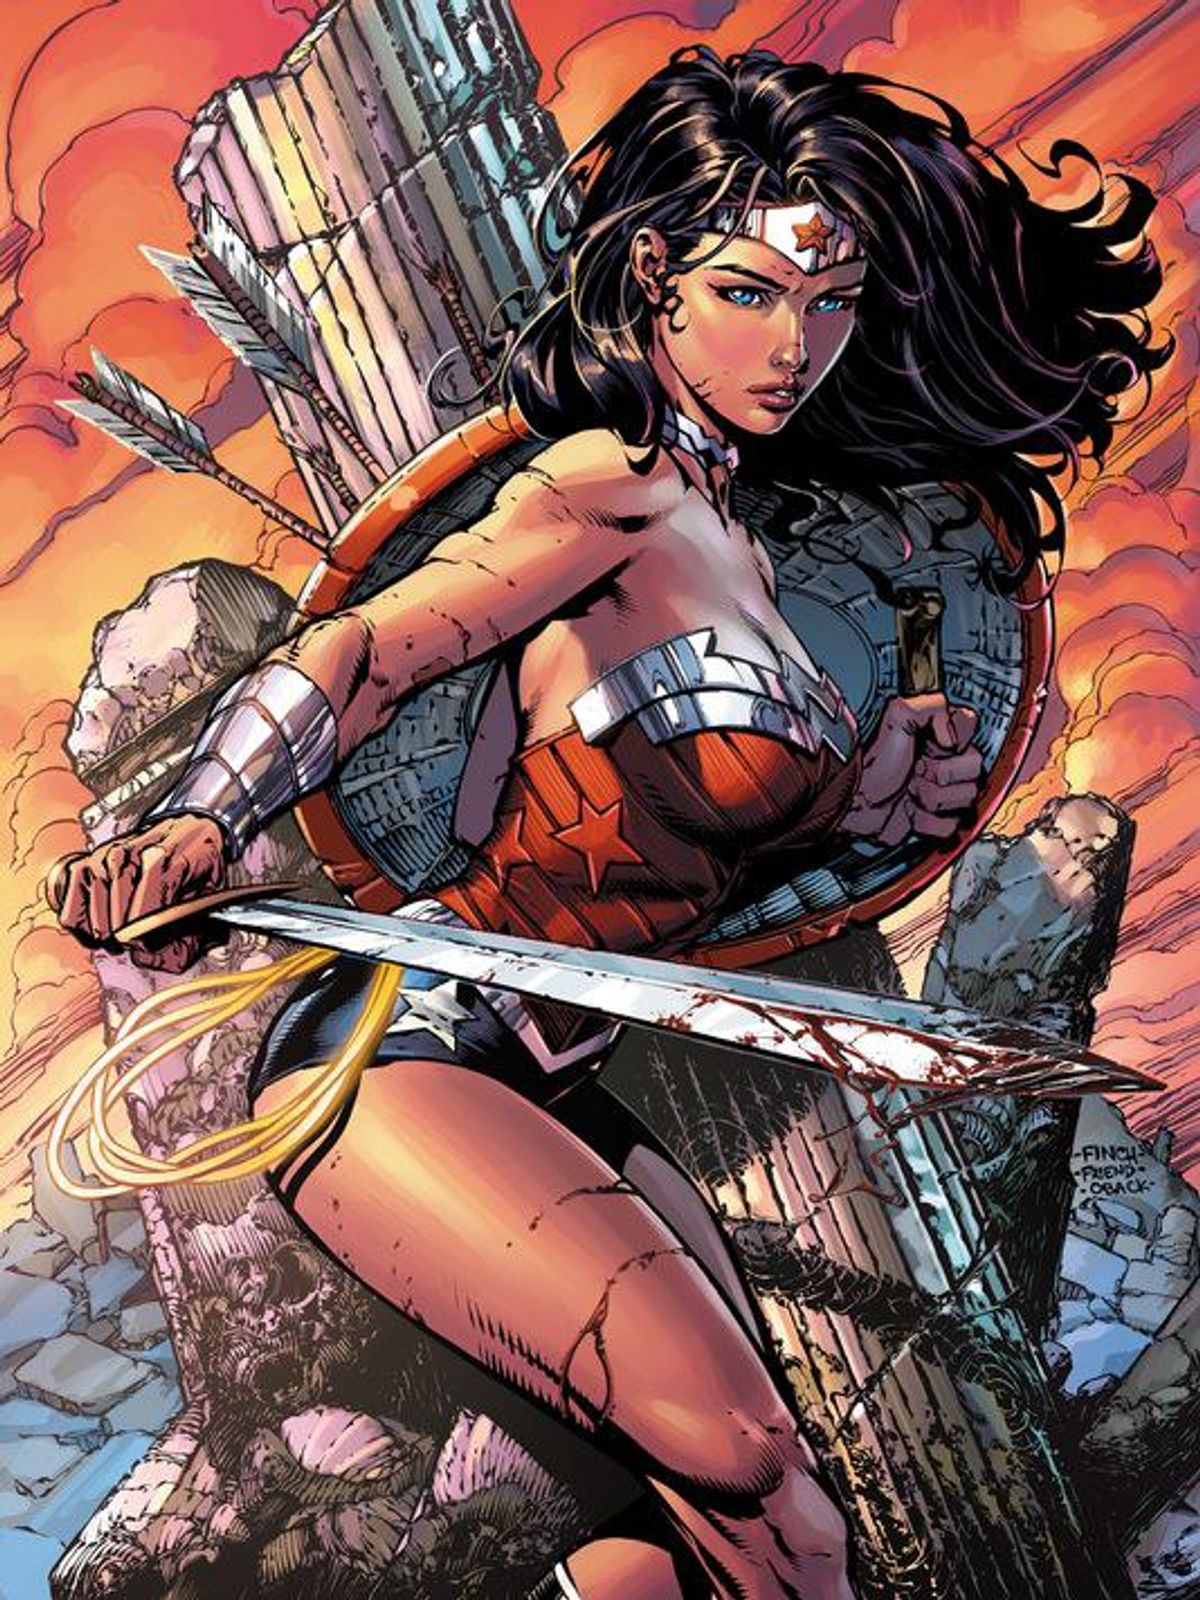 Why We All Need Wonder Woman